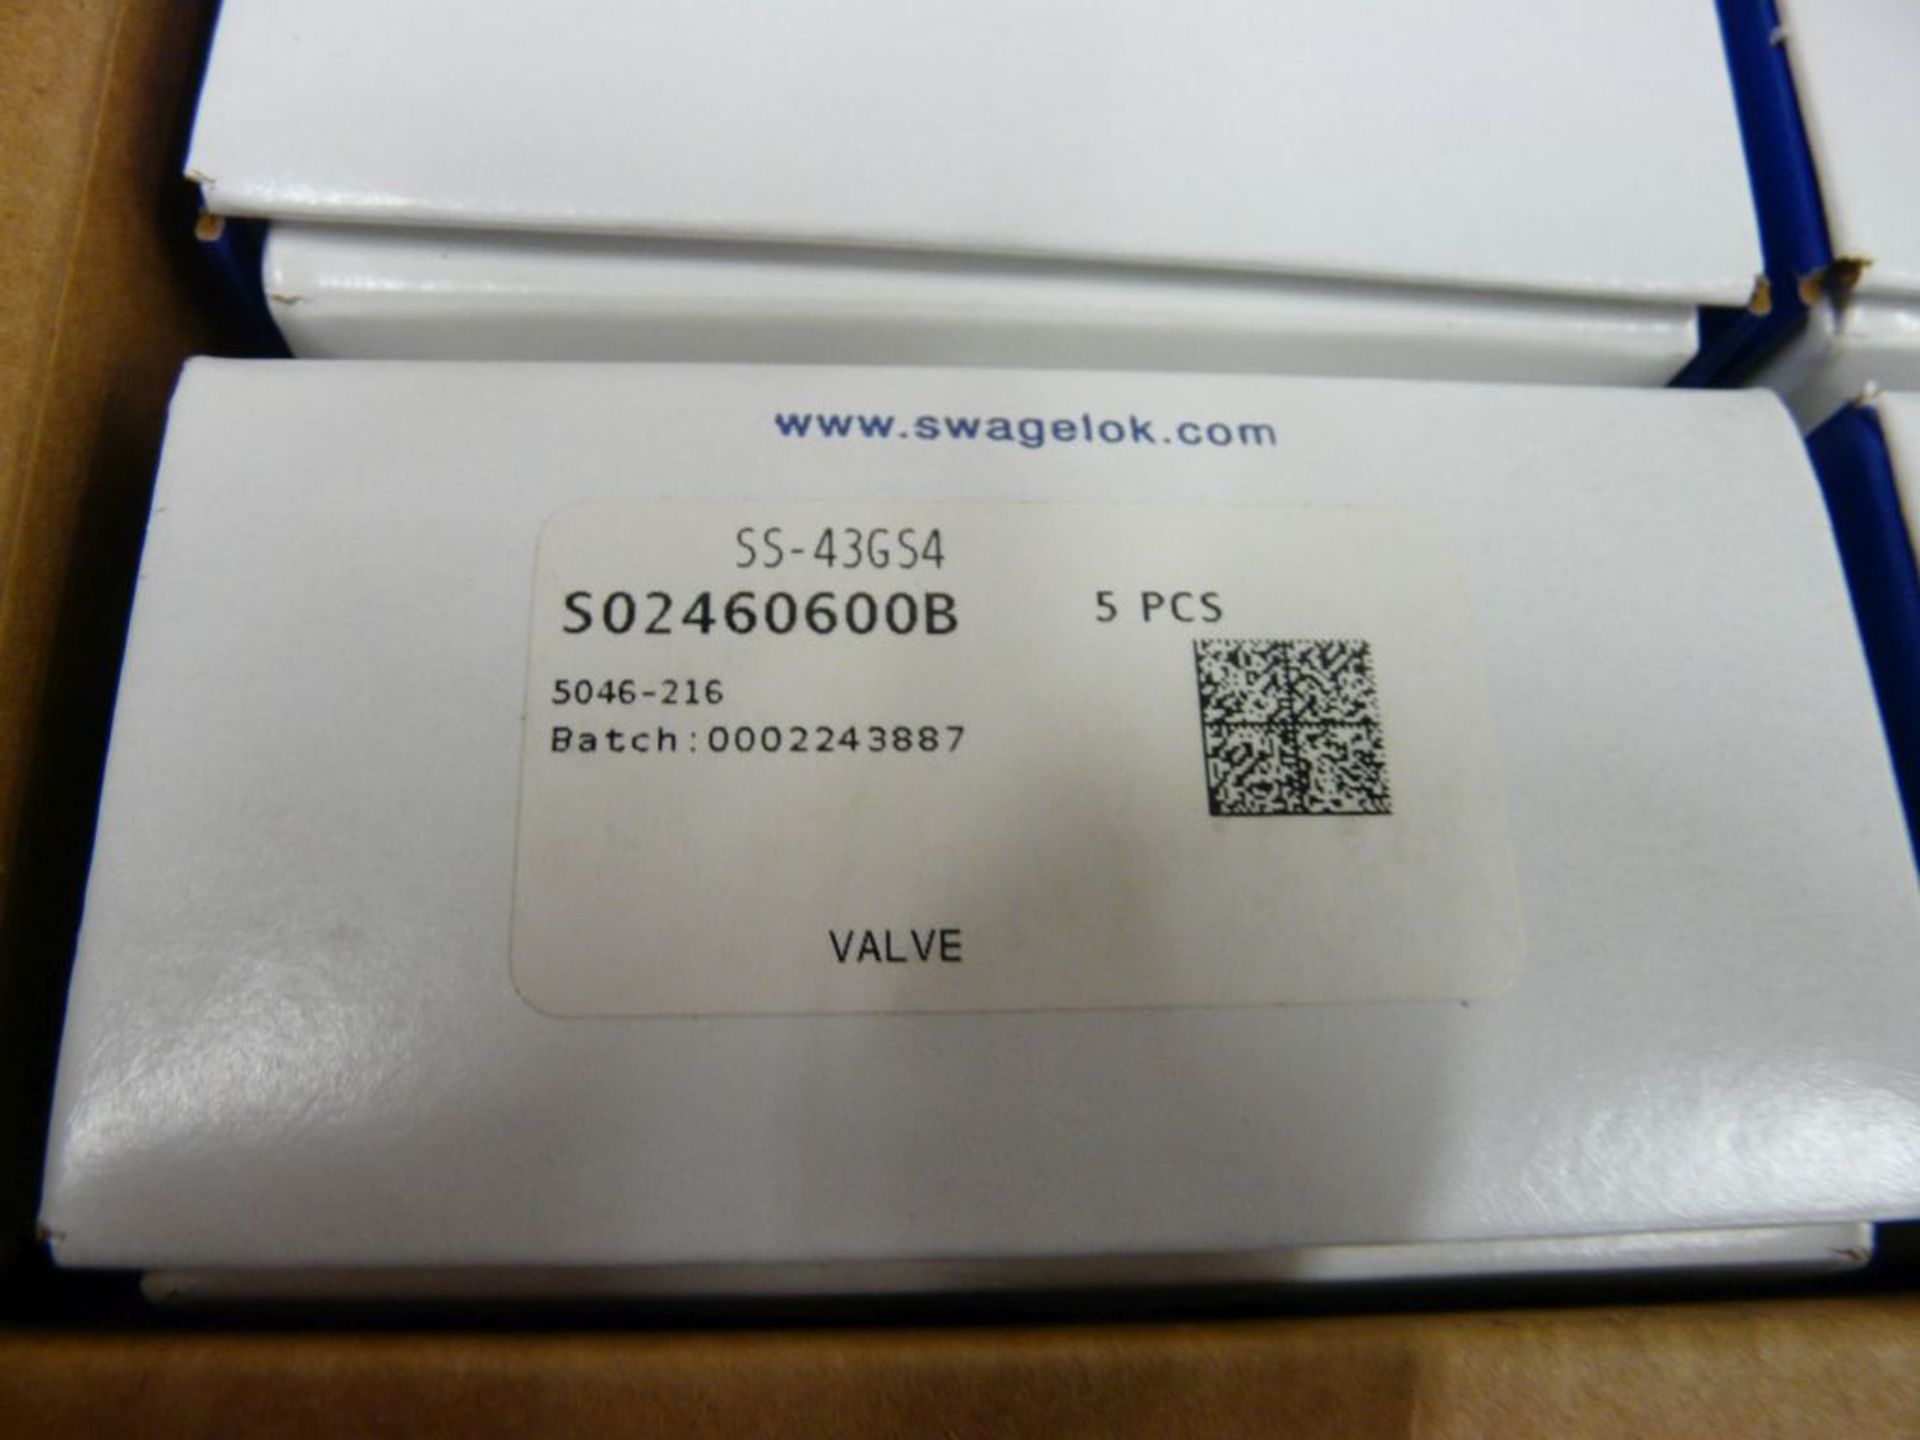 Lot of (50) Swagelok Valves|Part No. SS-43GS4 - Image 4 of 4